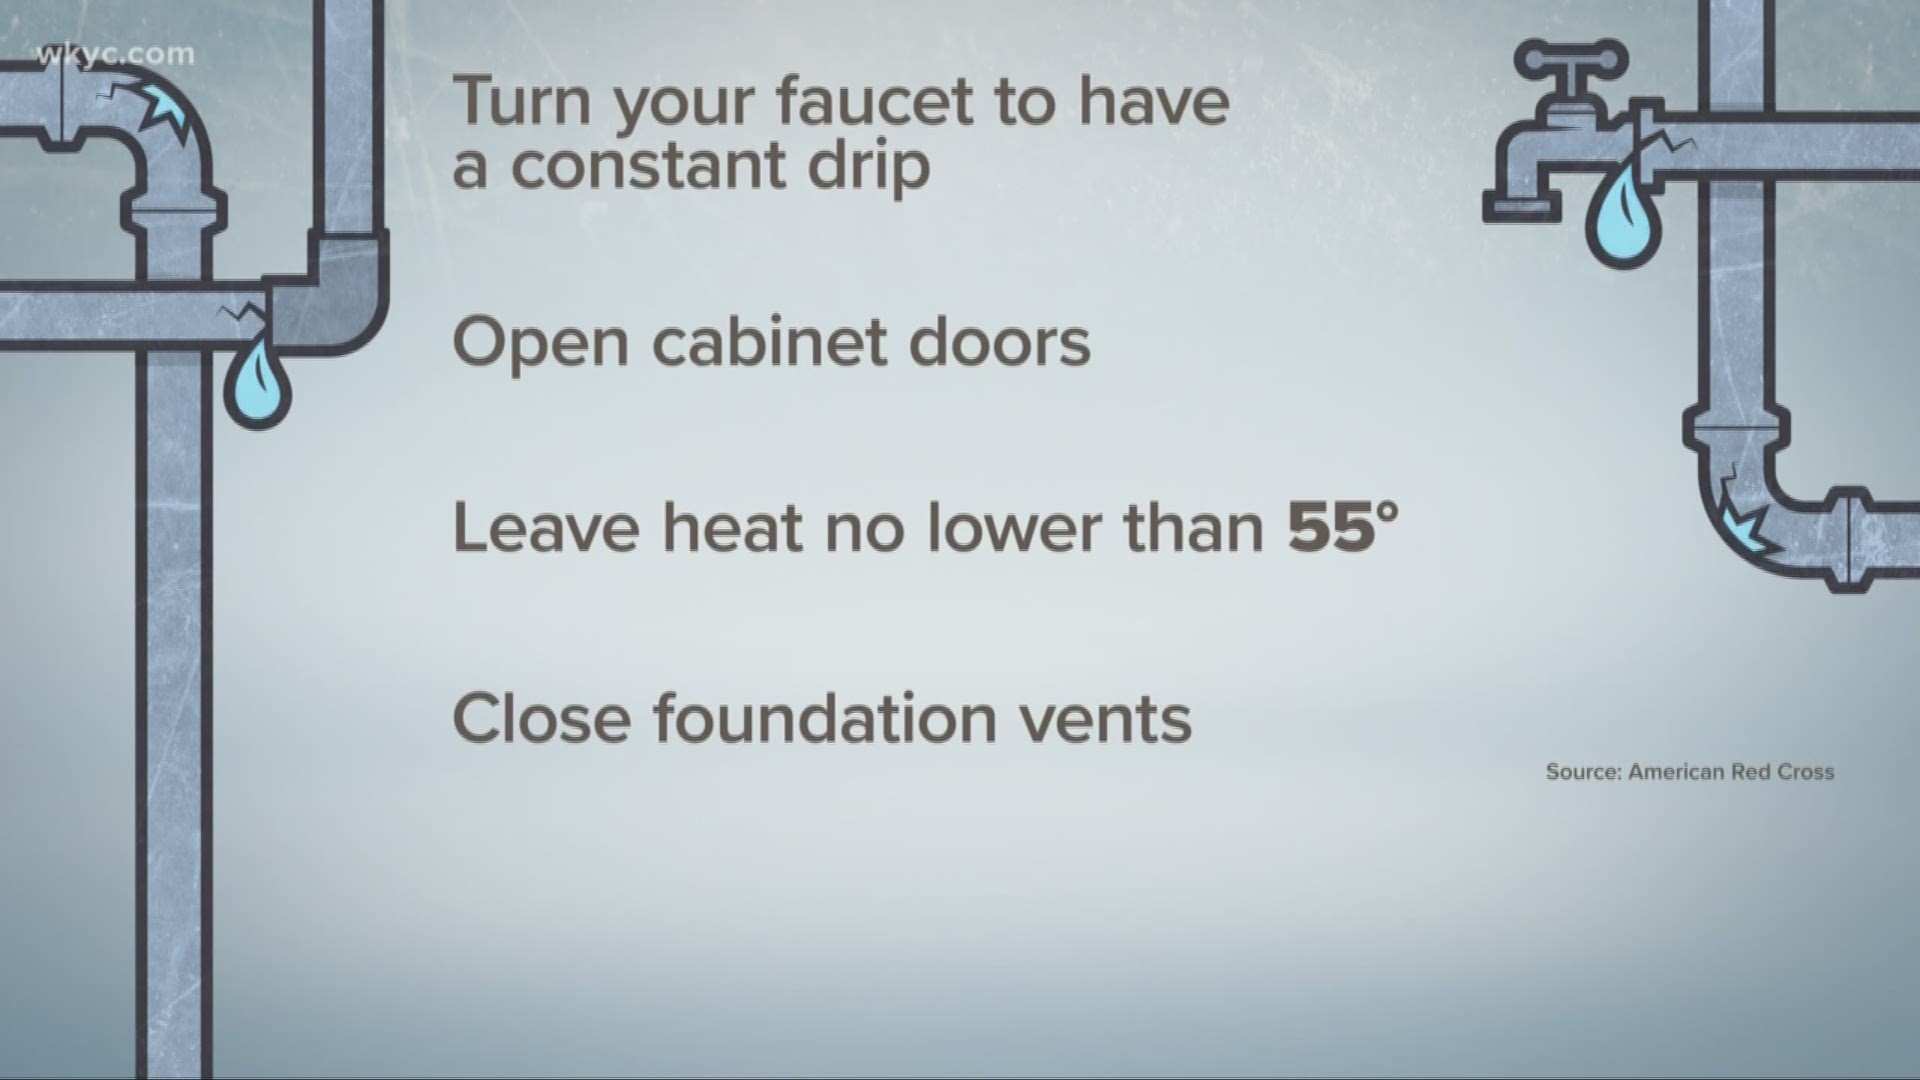 Here are some tips you should keep in mind on preventing your pipes from freezing throughout the winter. WKYC's Austin Love is here for you.